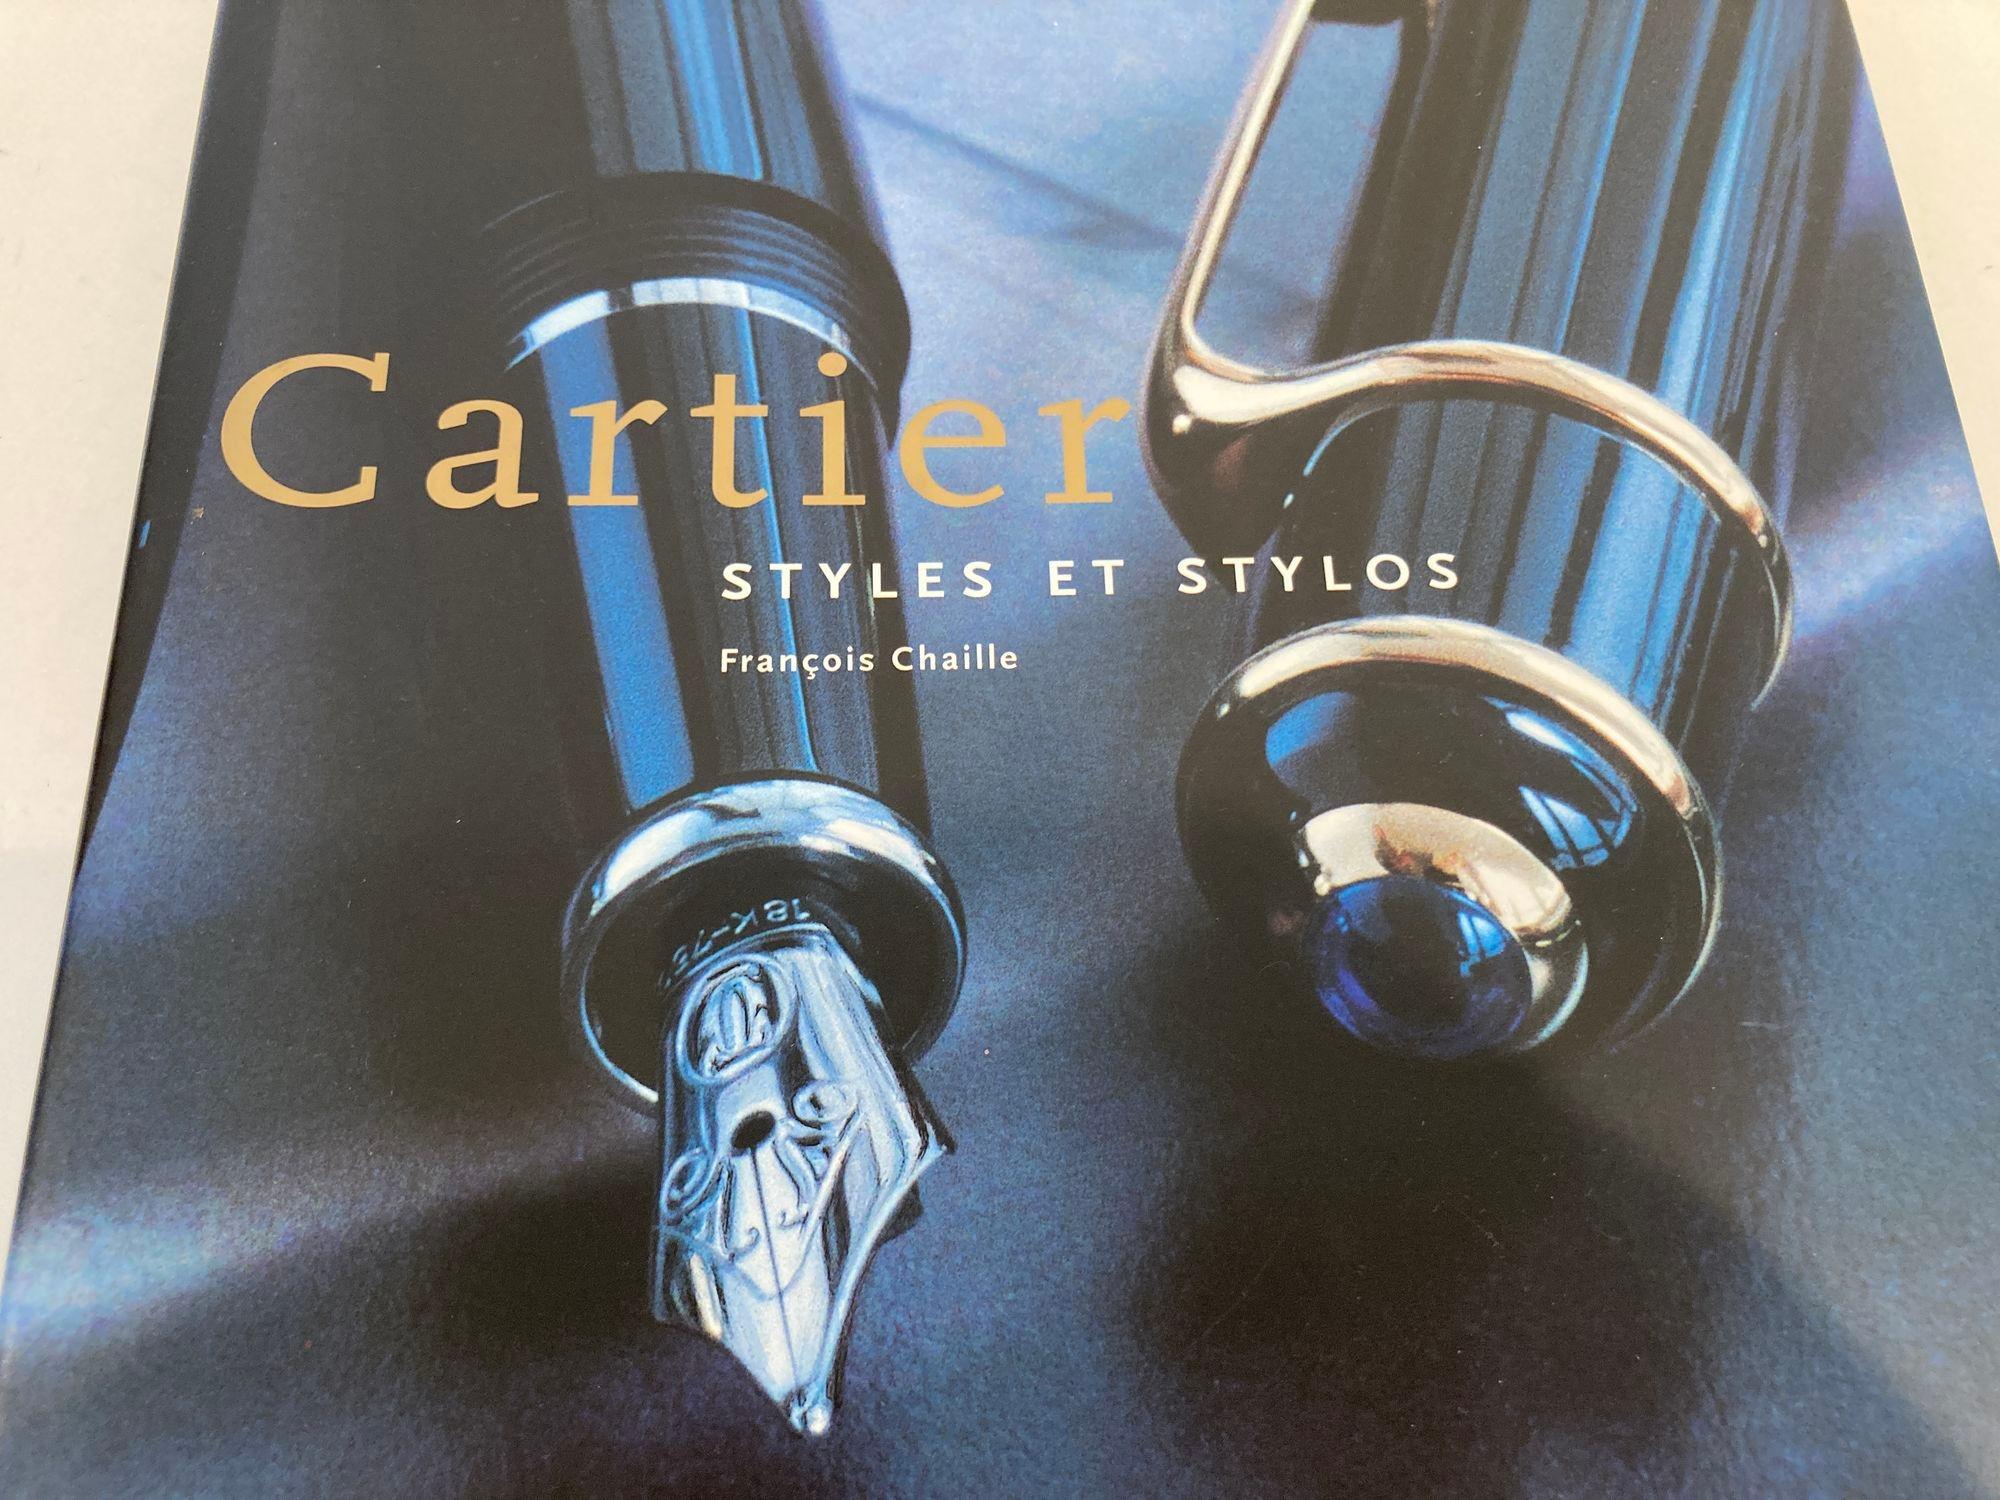 Cartier Styles et Stylos Hardcover French Edition, Cartier Creative Writing For Sale 11